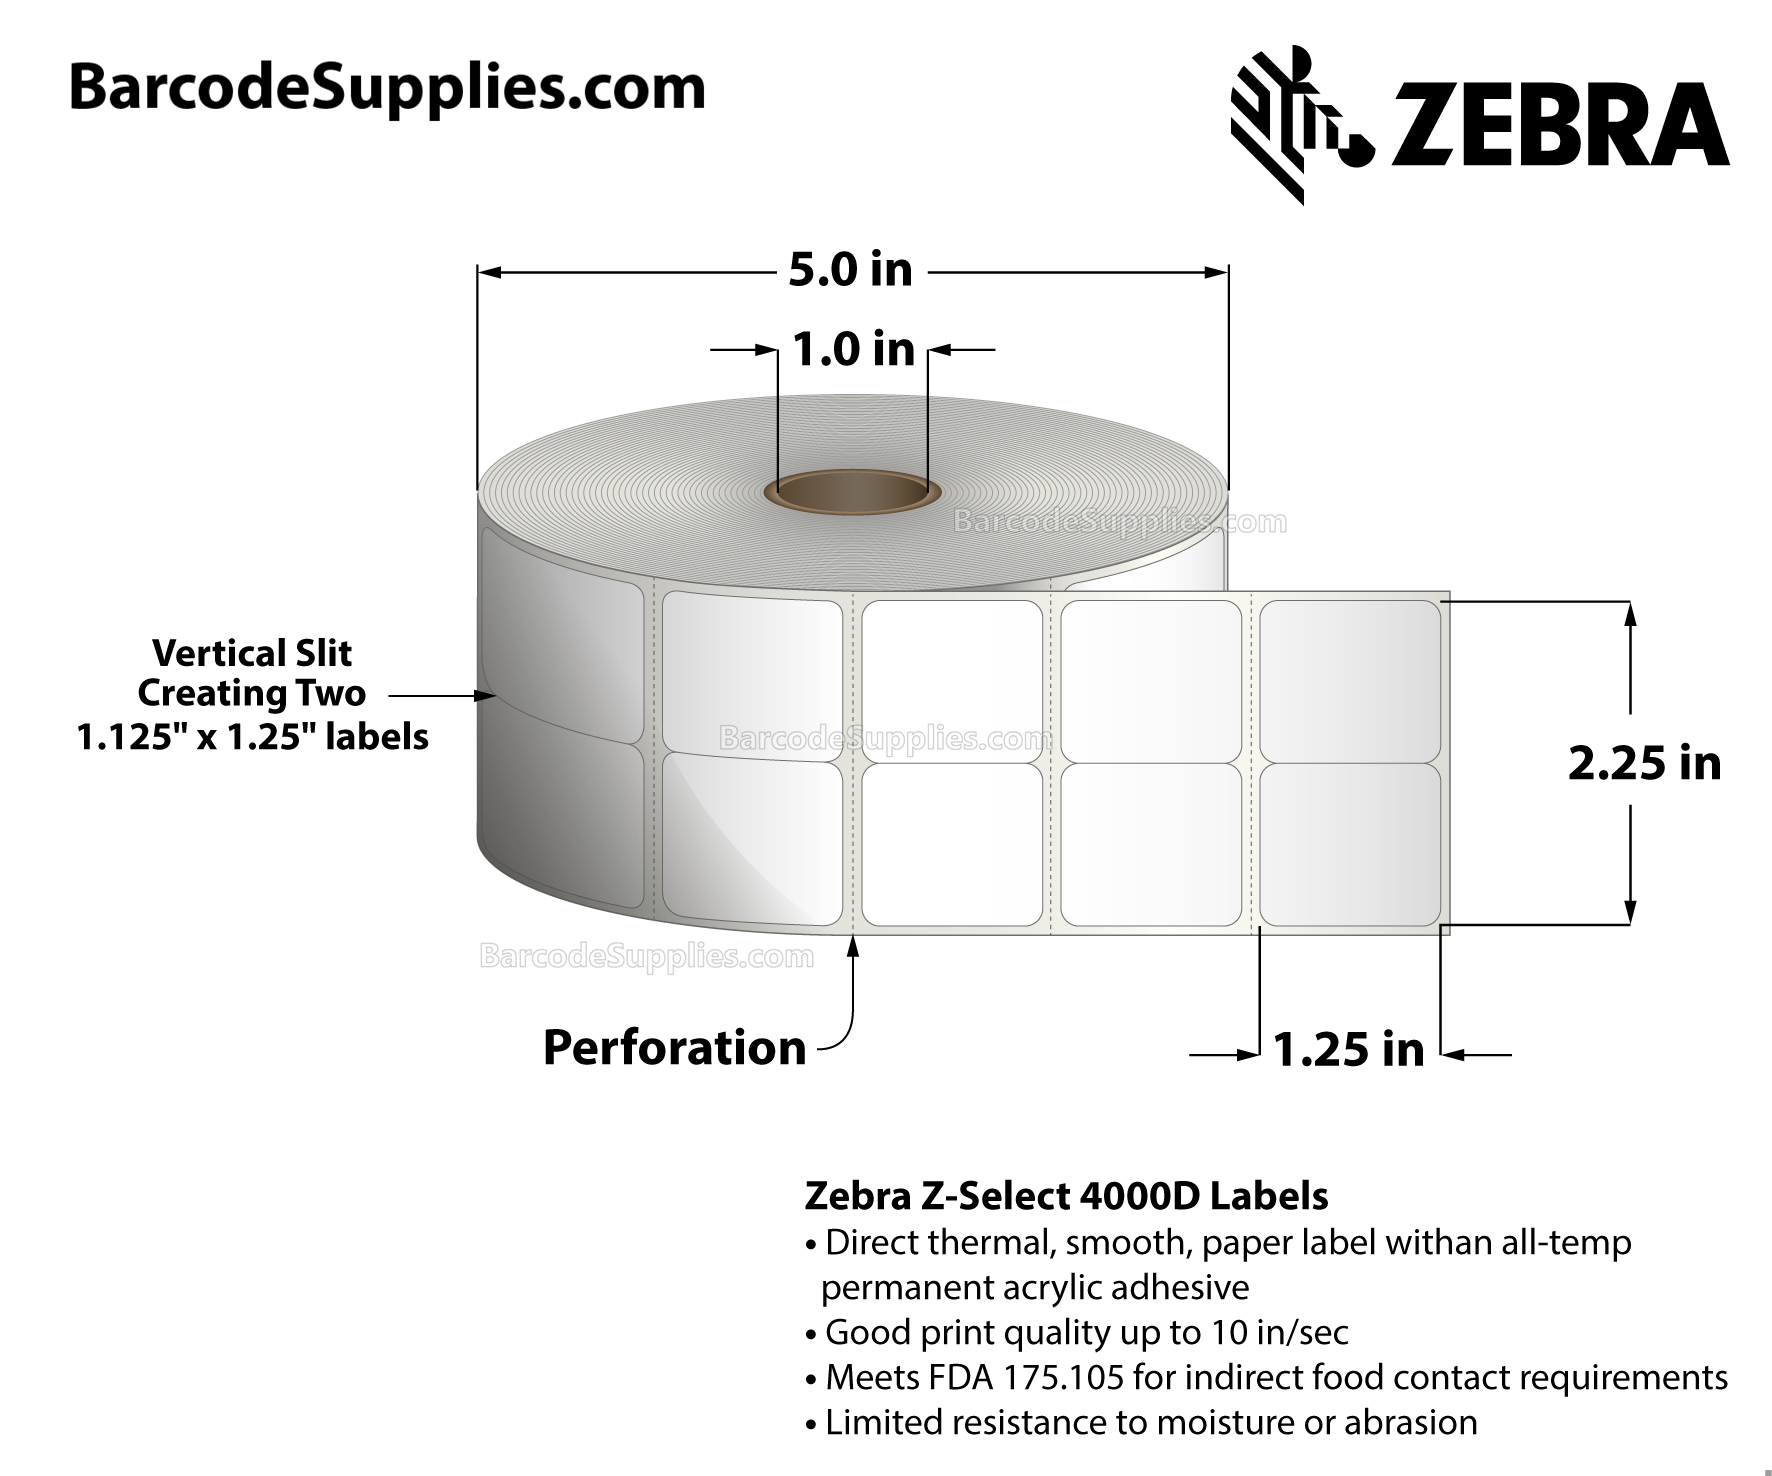 2.25 x 1.25 Direct Thermal White Z-Select 4000D Labels With All-Temp Adhesive - Center vertical slit creating two 1.125" x 1.25" labels - Perforated - 1910 Labels Per Roll - Carton Of 6 Rolls - 11460 Labels Total - MPN: 10010051